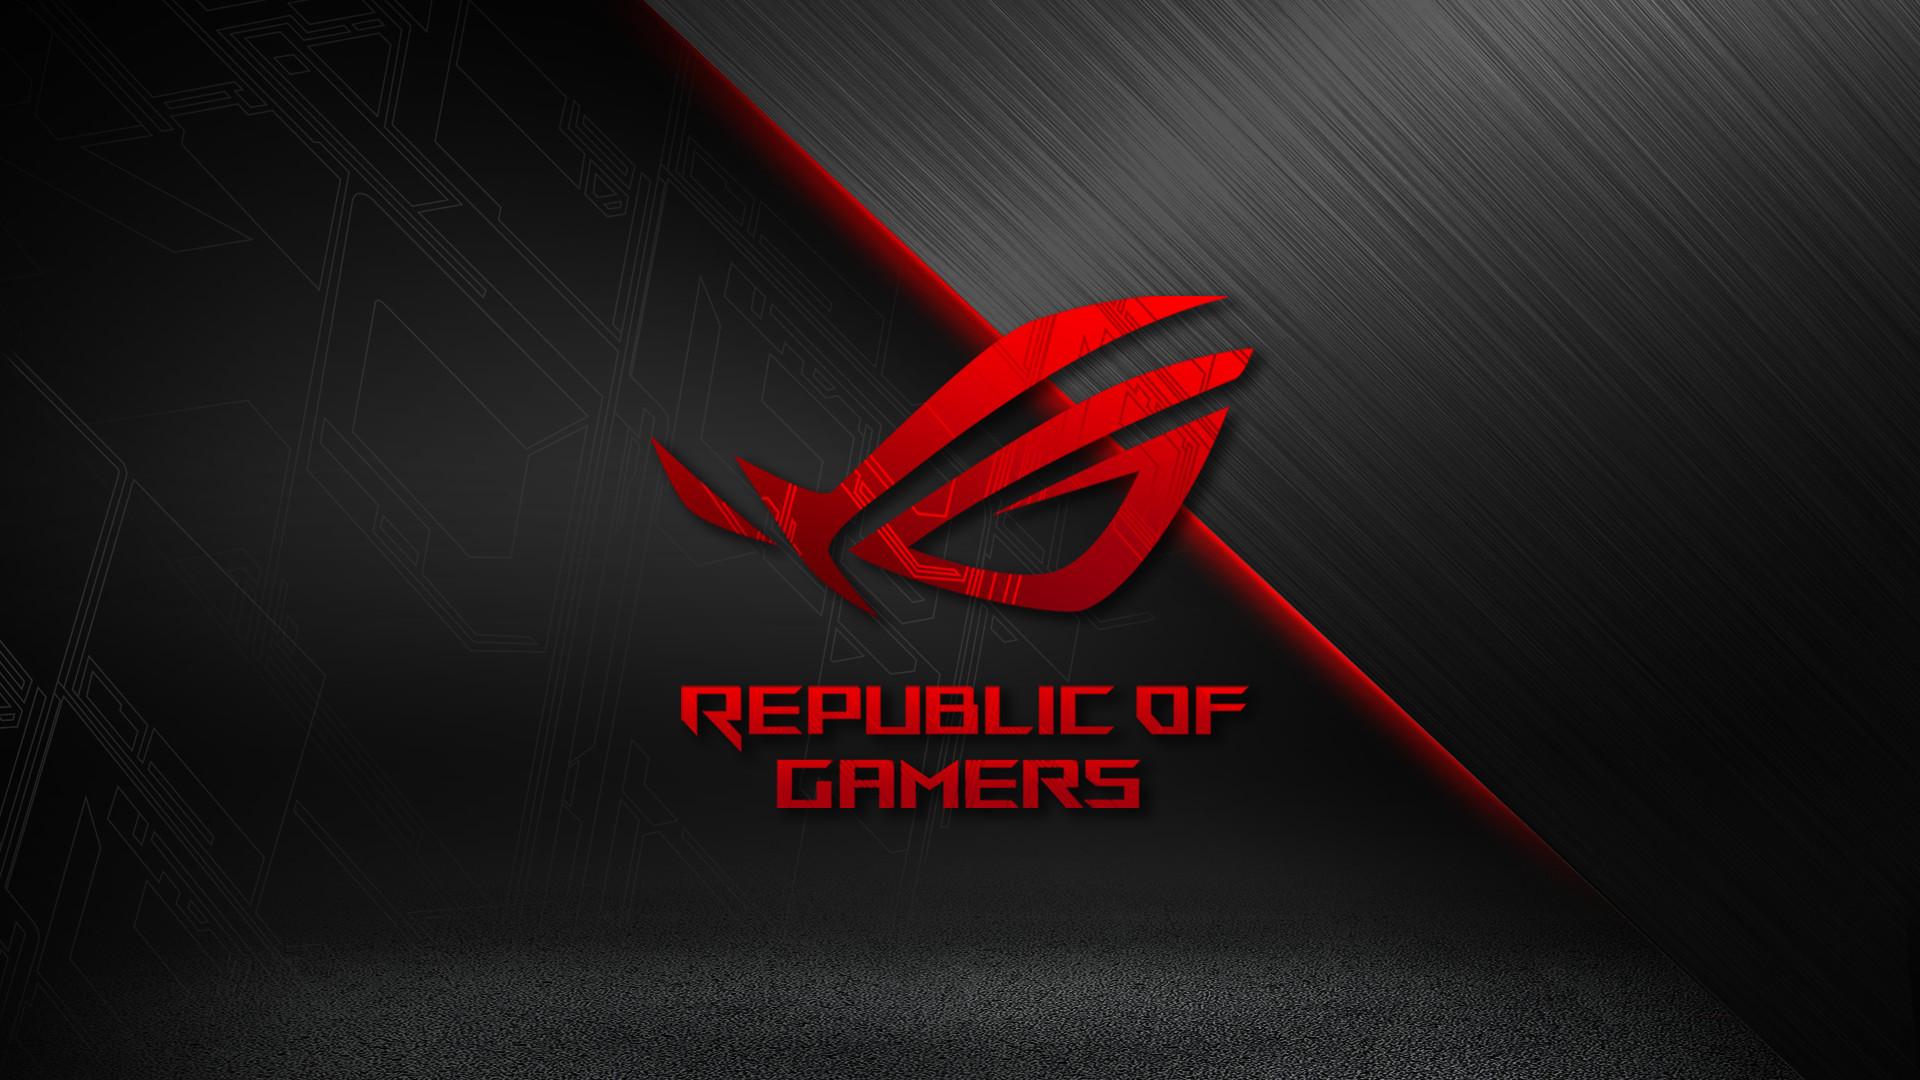 Asus Rog Wallpaper background picture